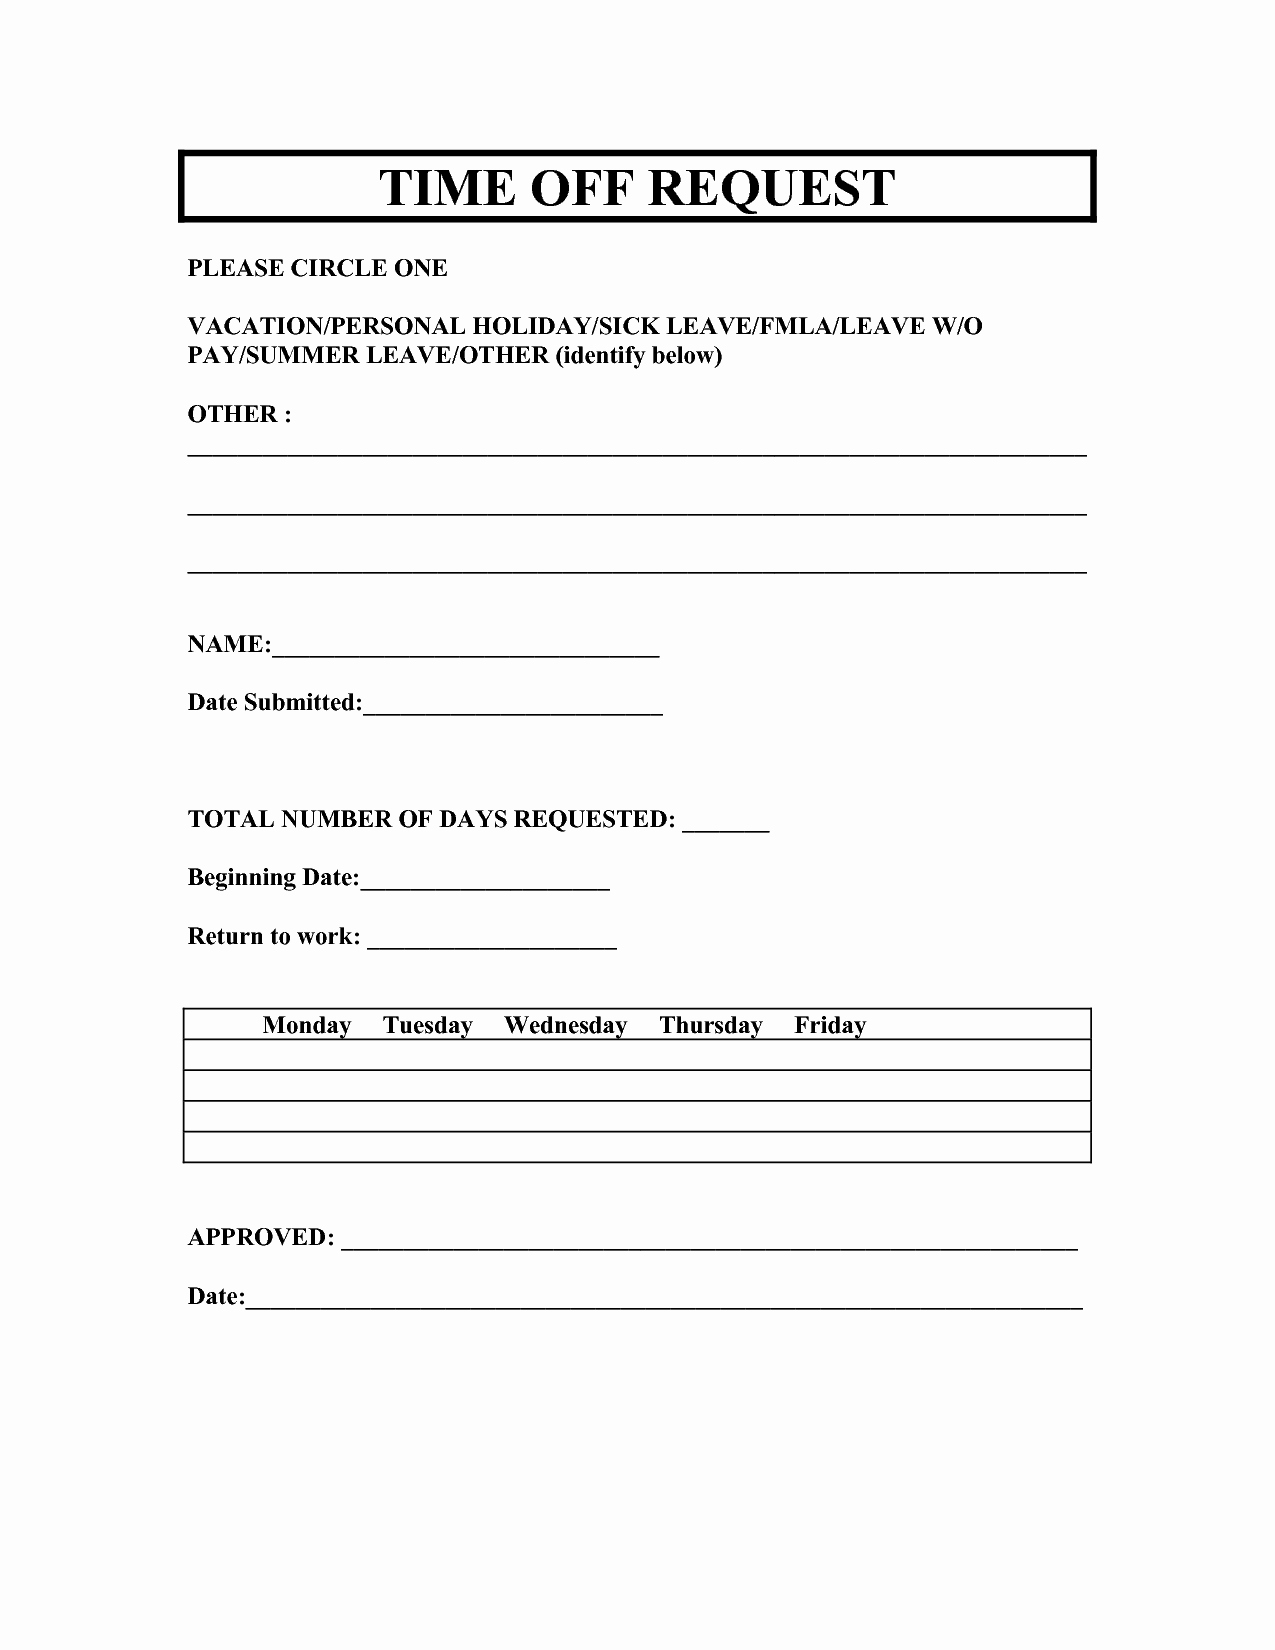 Work Request form Template Unique Vacation Time F Request Template